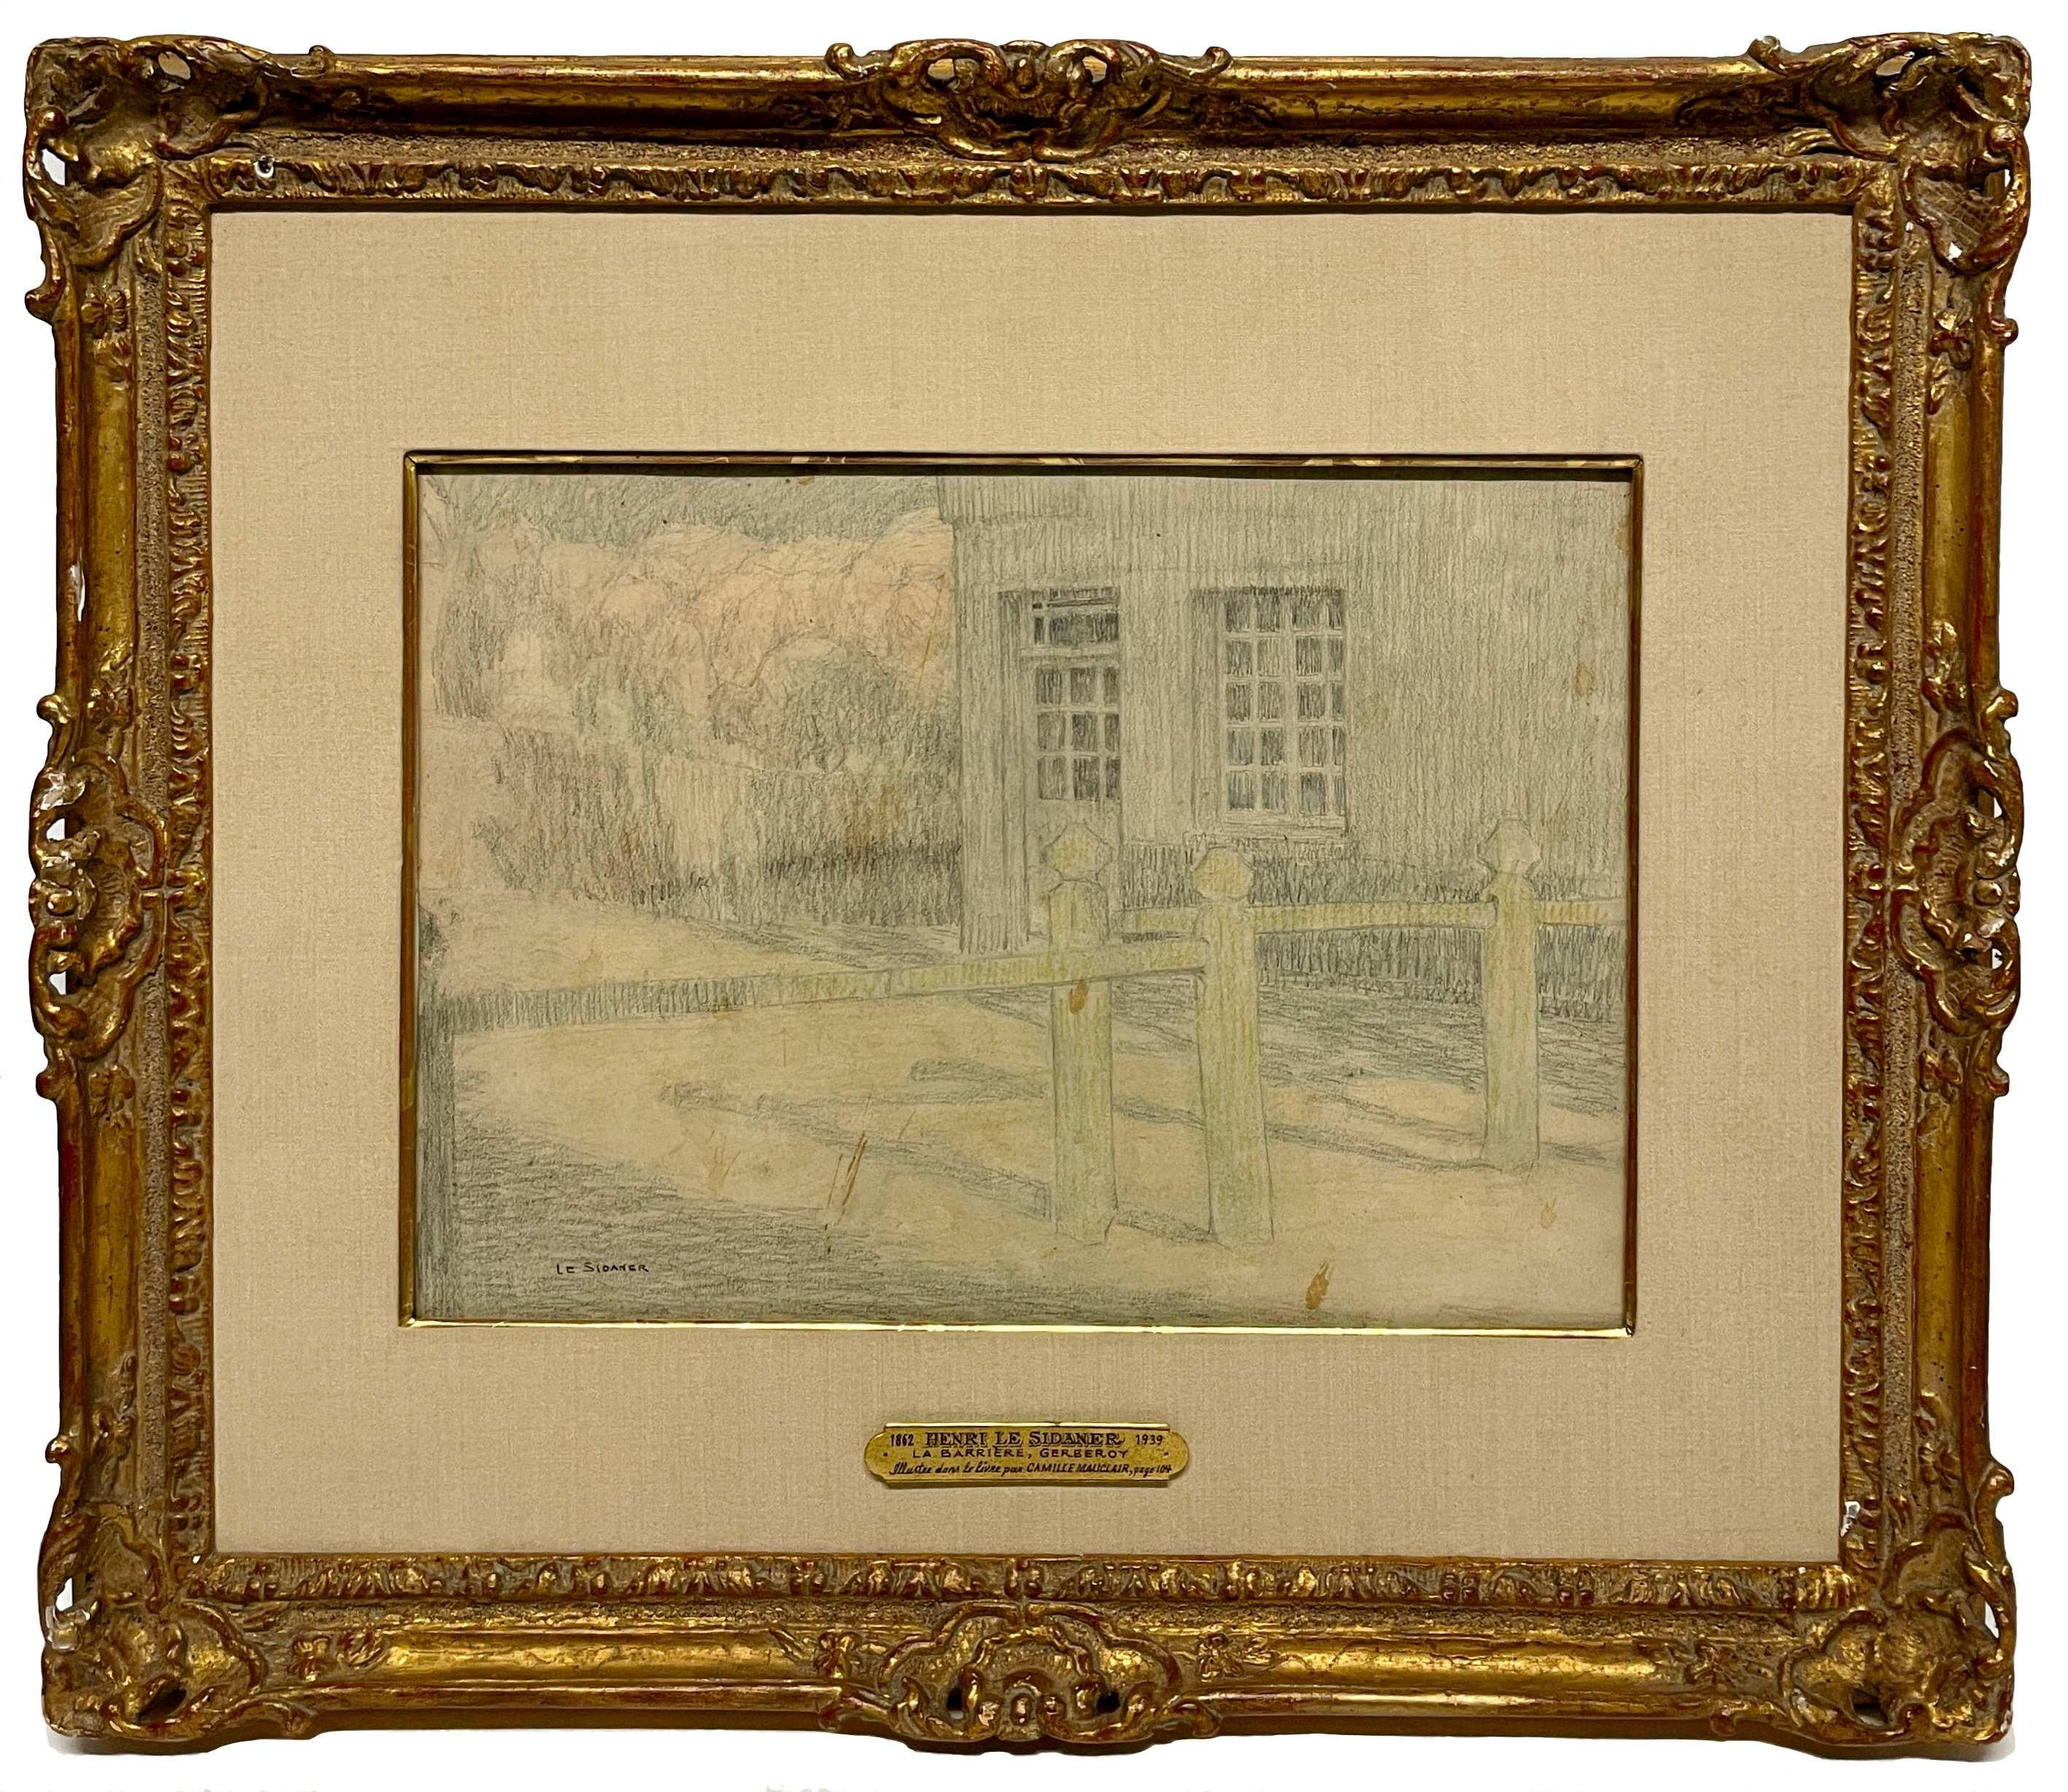 A Graphite & Colored Pencil Drawing by Henri Le Sidaner, 